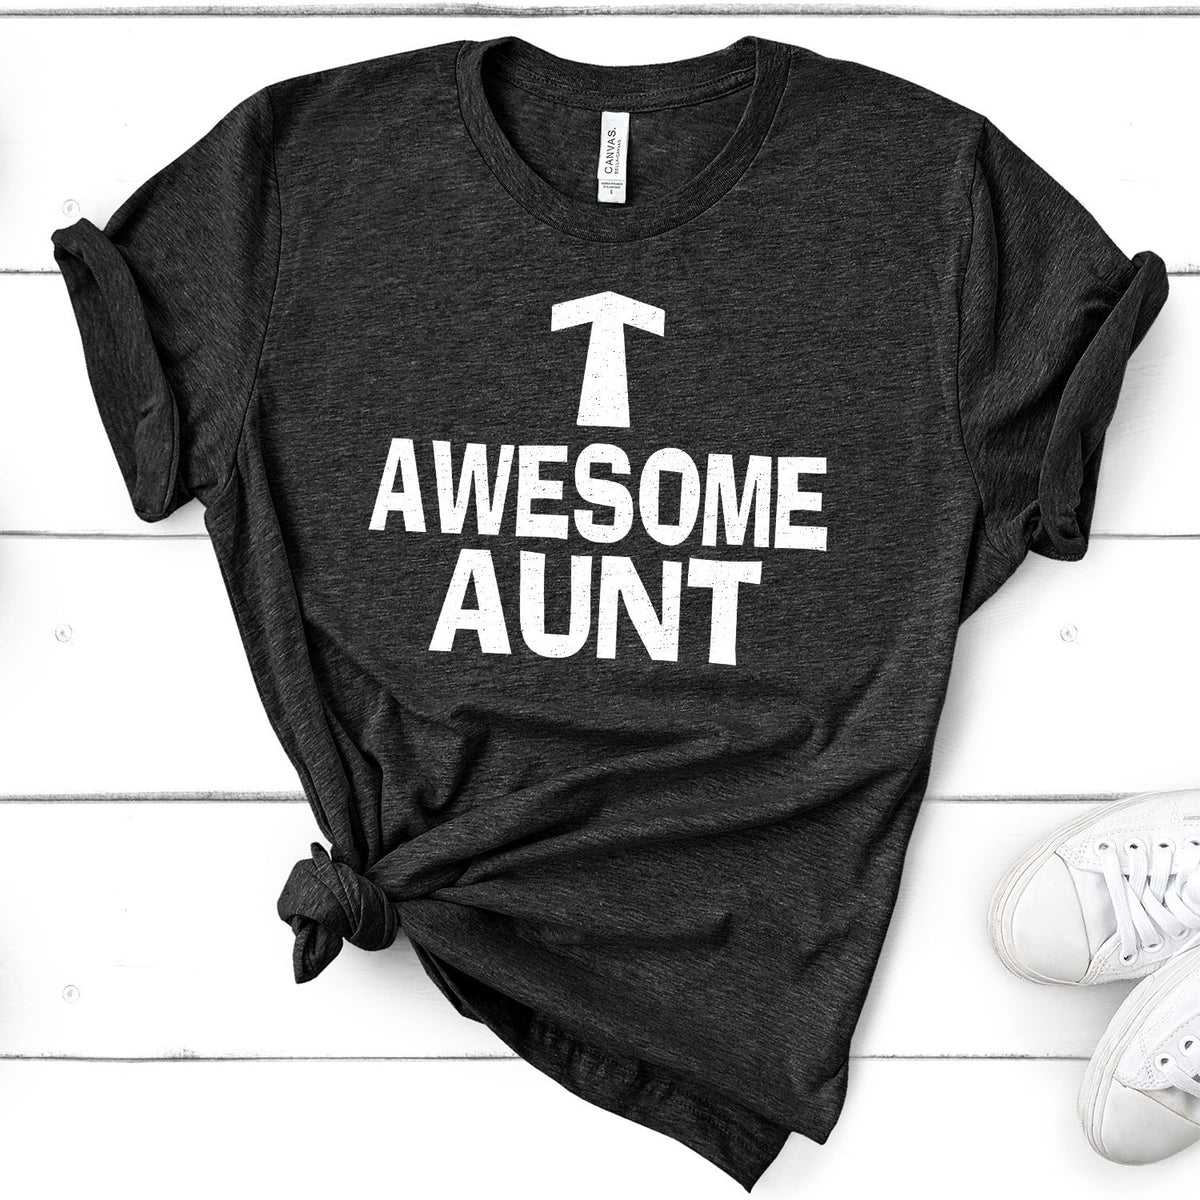 Awesome Aunt - Short Sleeve Tee Shirt